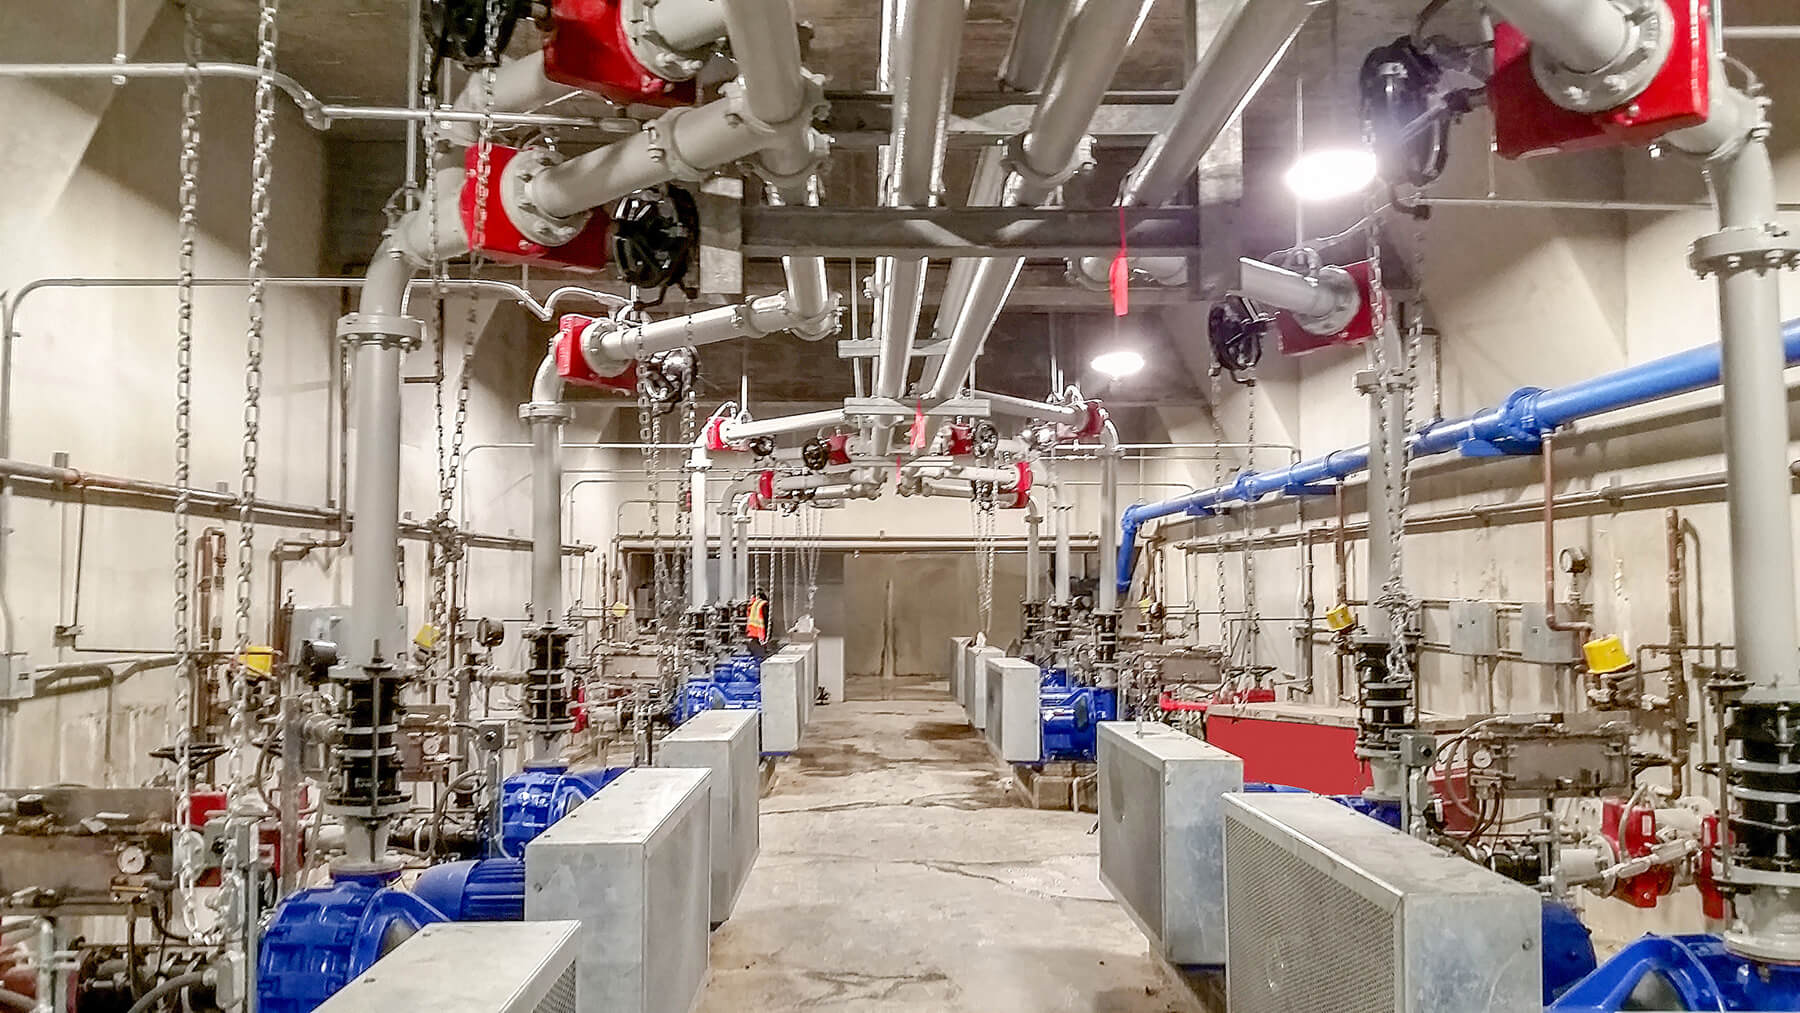 Interior image of grit removal screening system including piping at RM Clayton WRC’s headworks facility.